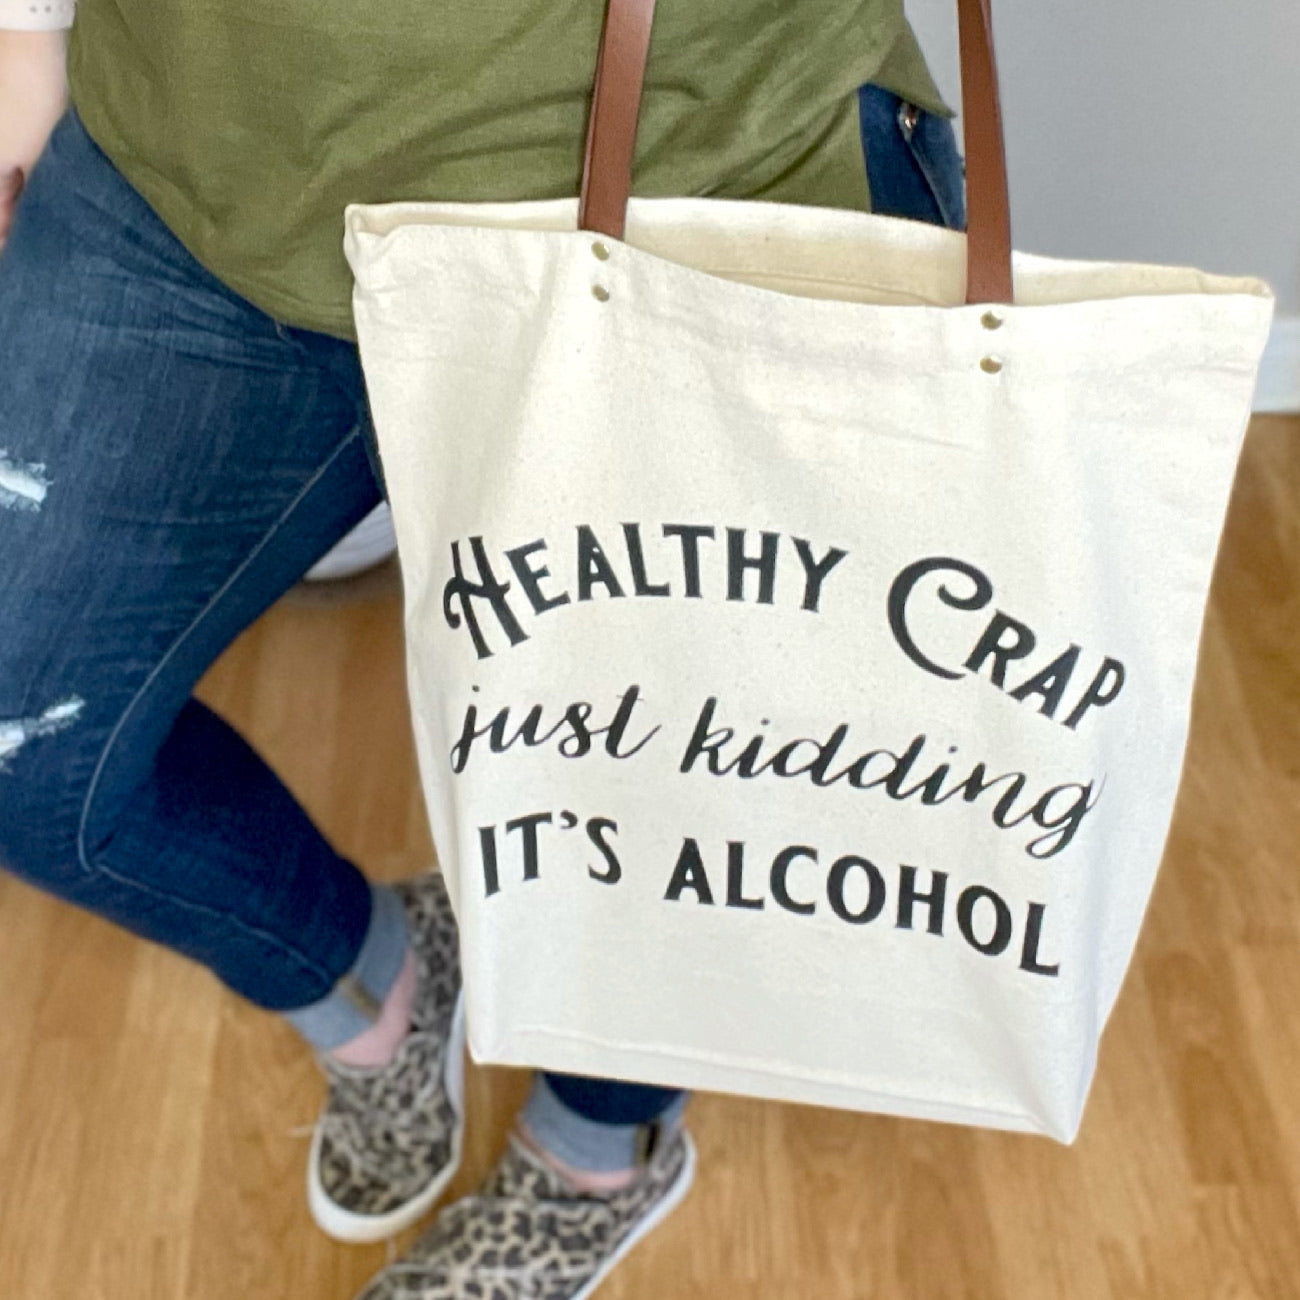 Woman holding a canvas tote bag that says "Healthy Crap - Just kidding it's alcohol"